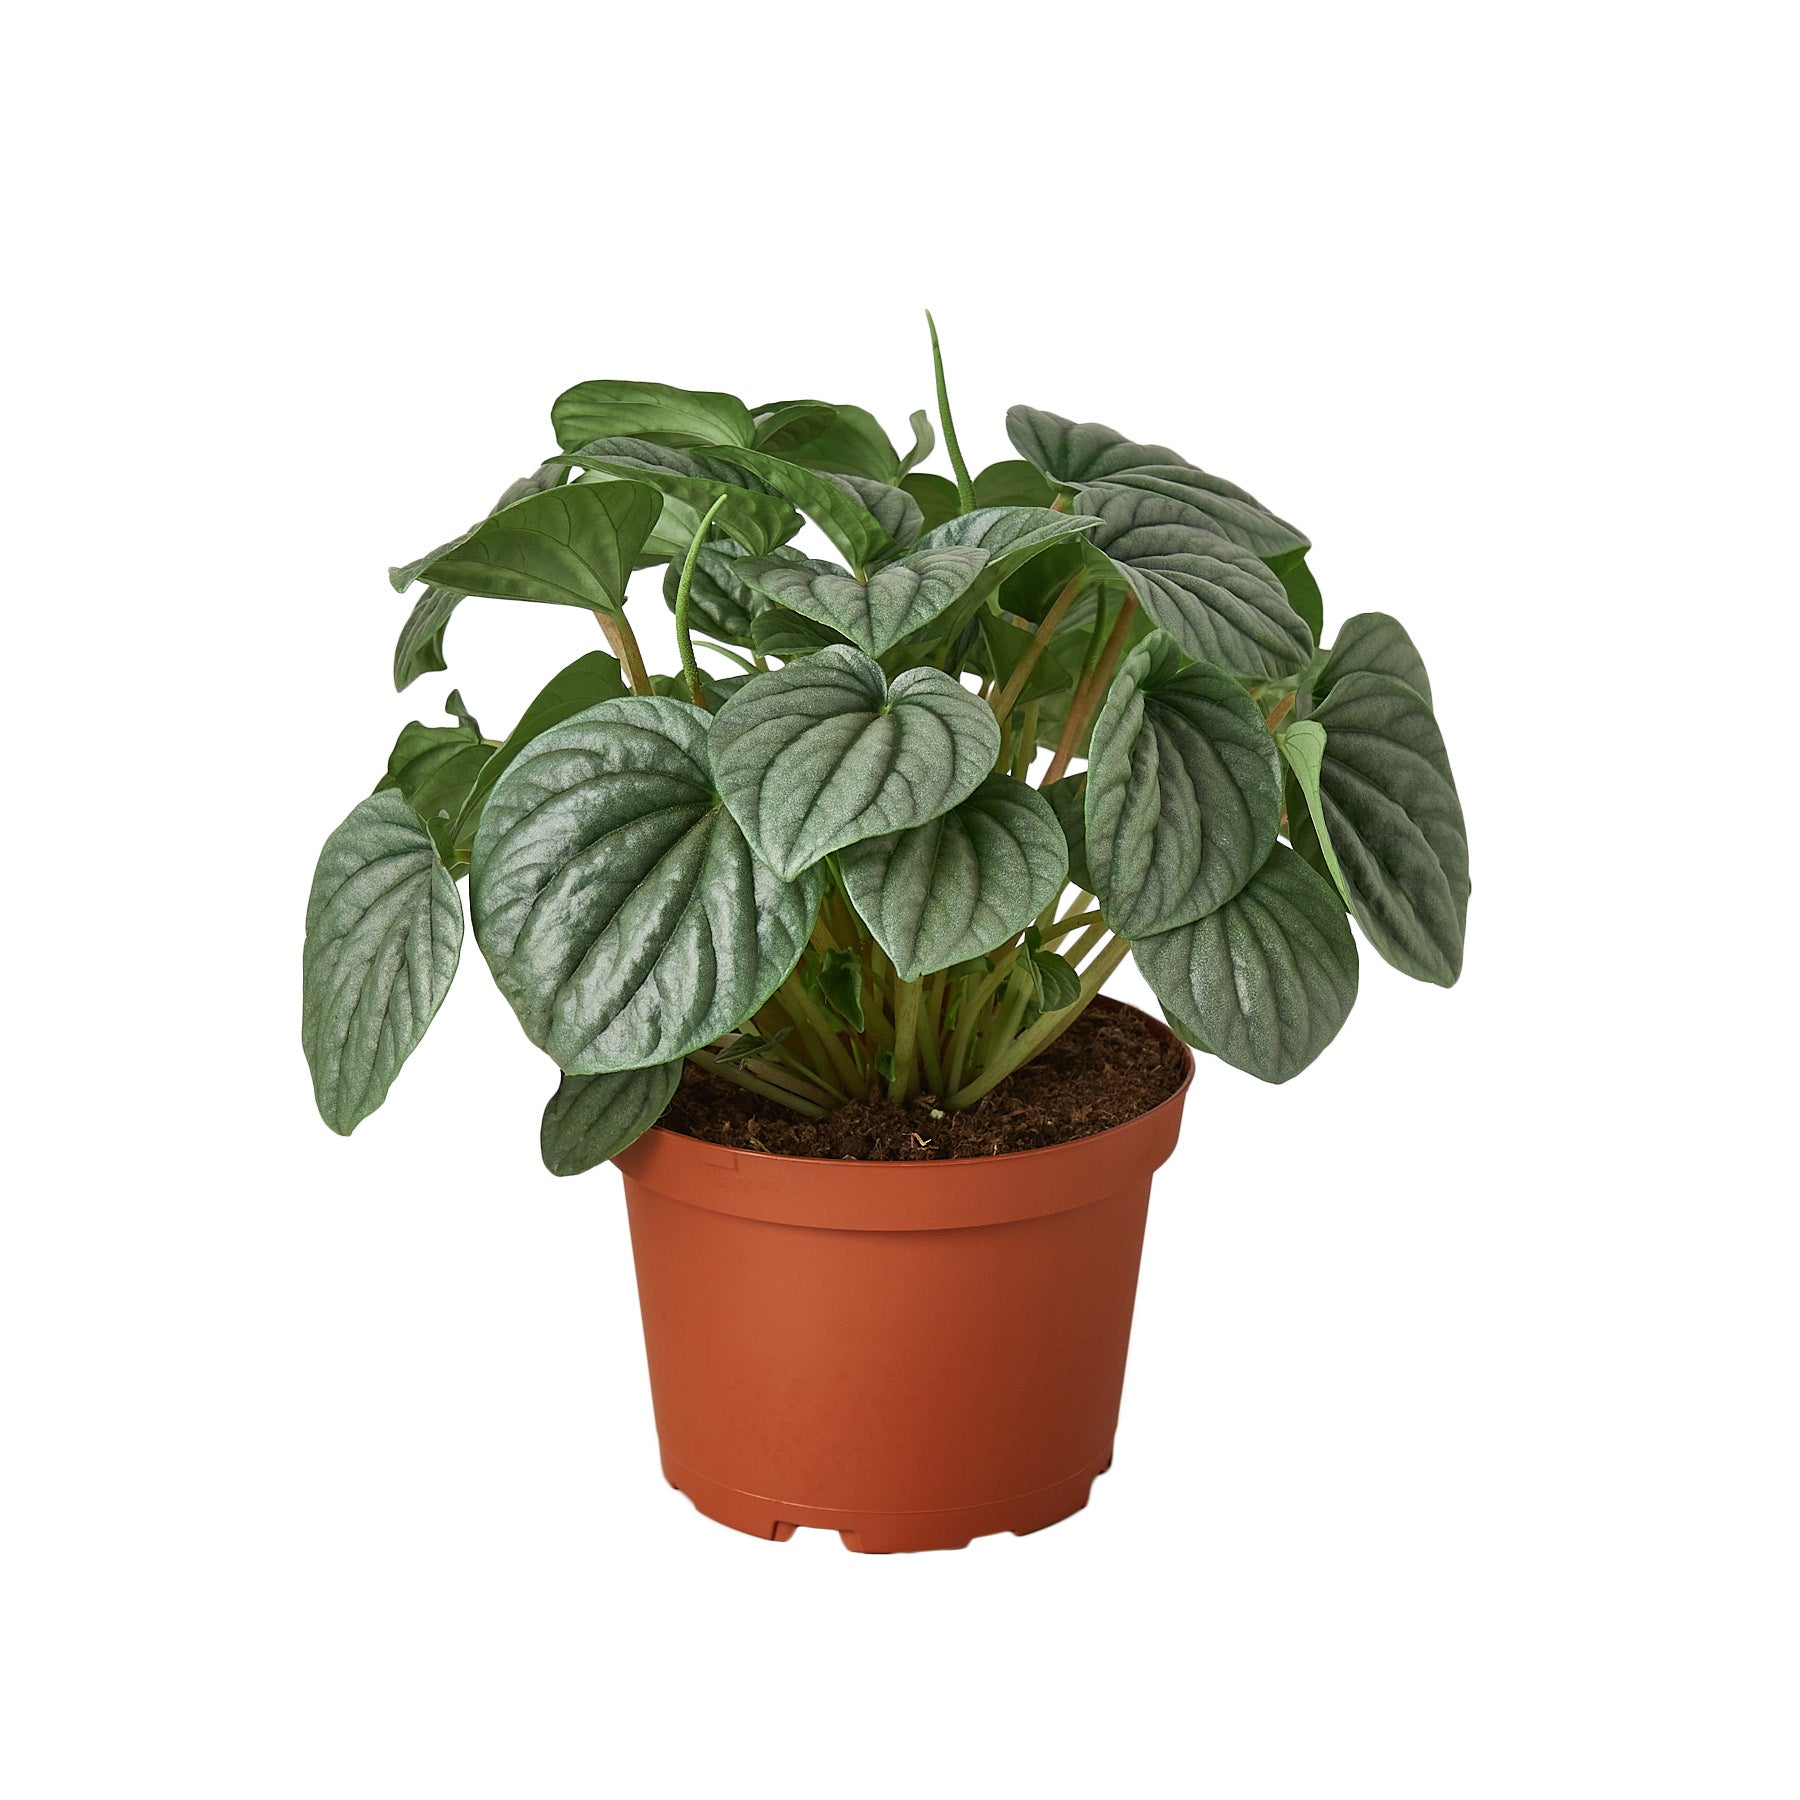 A plant in a brown pot on a white background found at a nearby garden center.